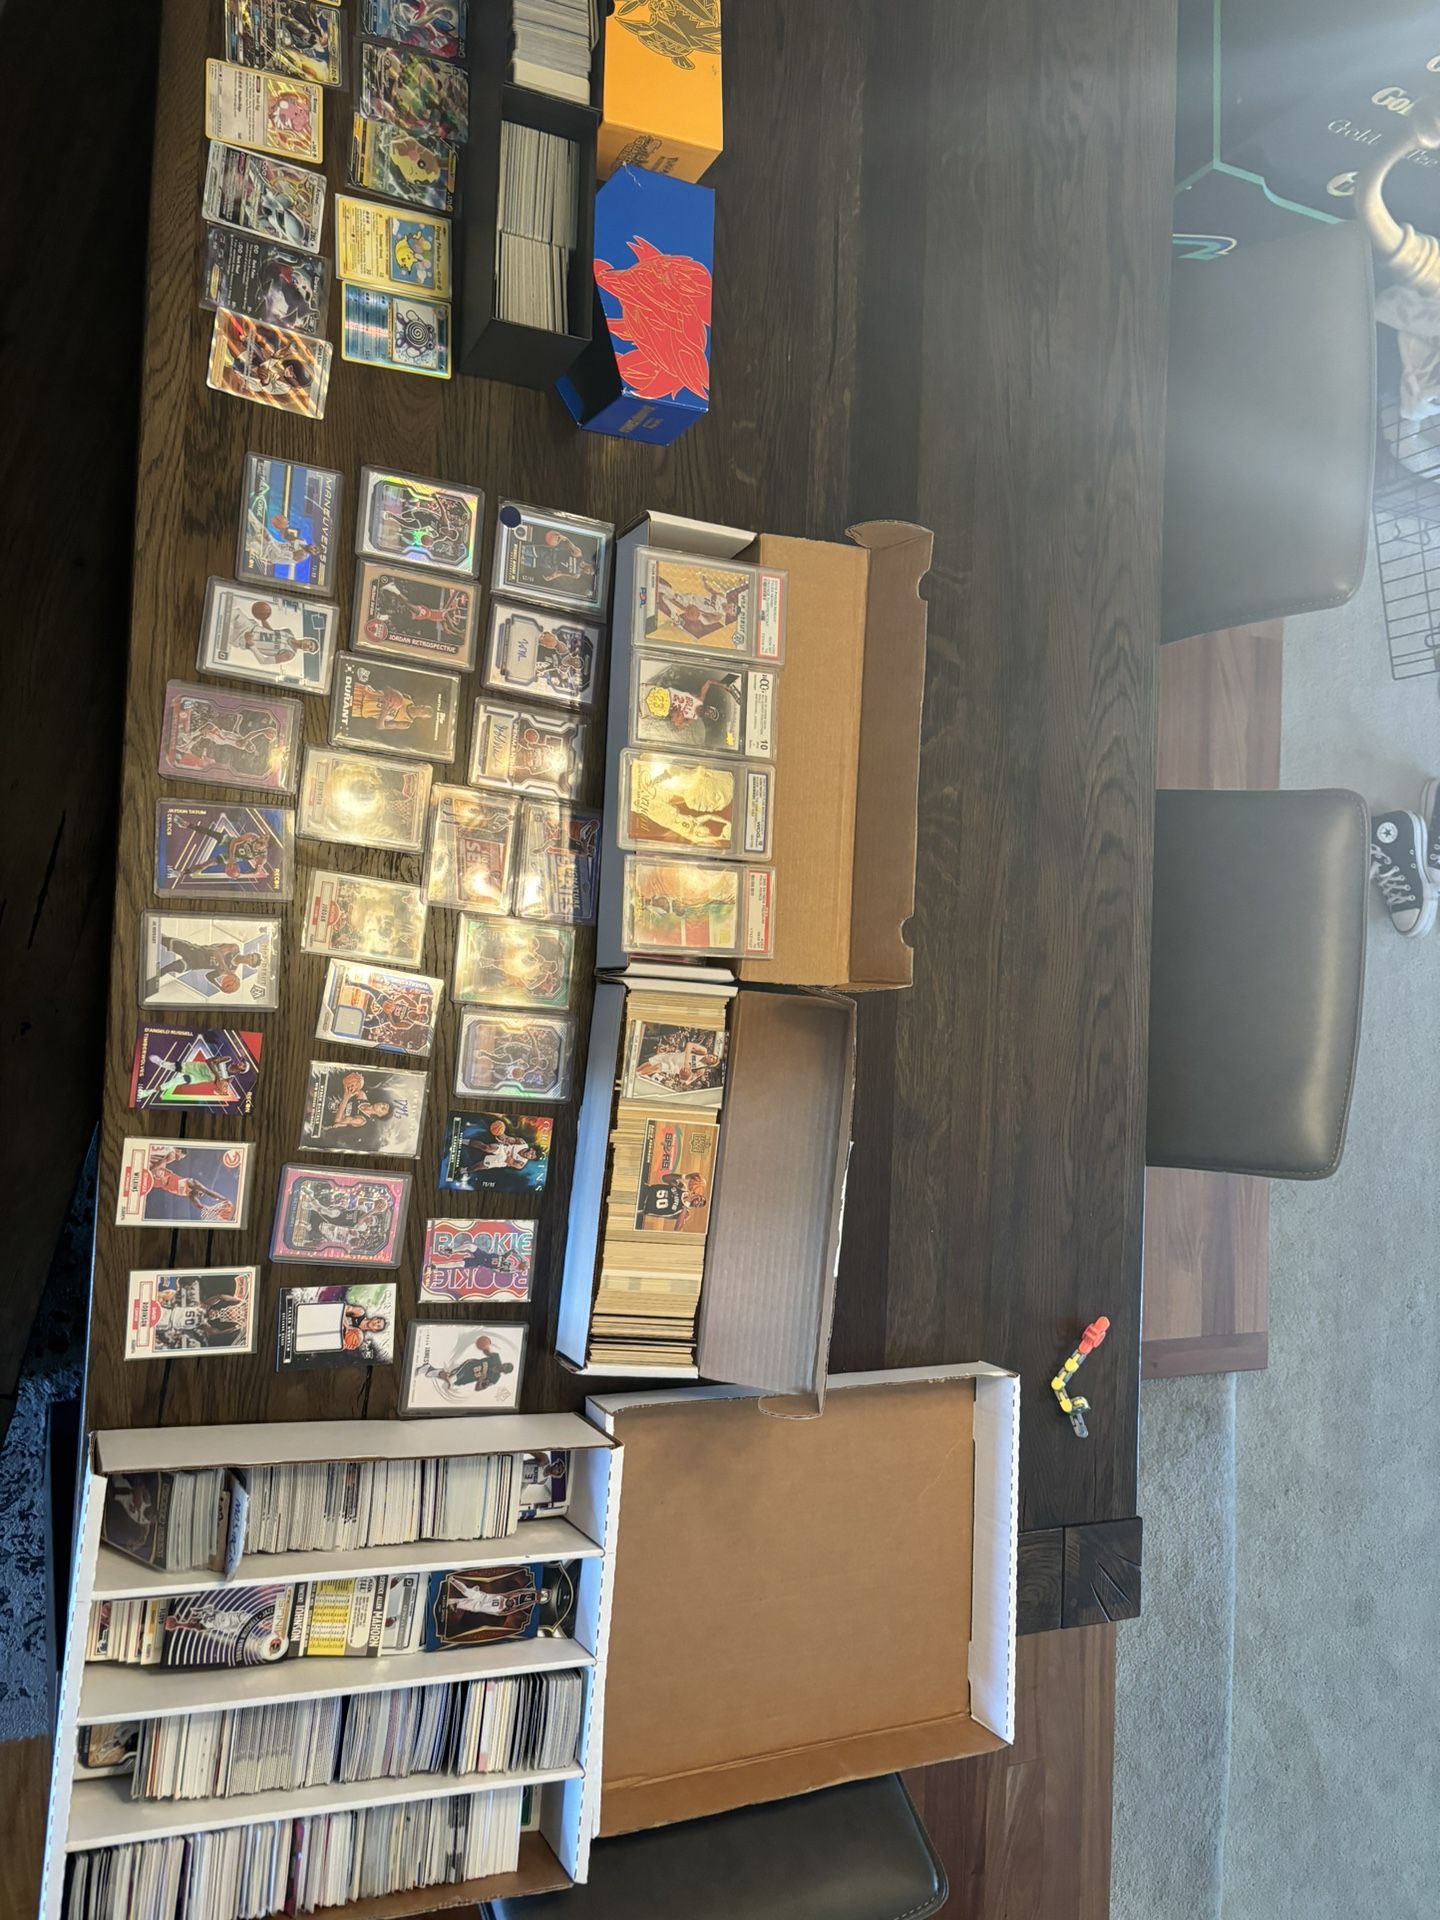 Sports Cards And Pokemon Cards